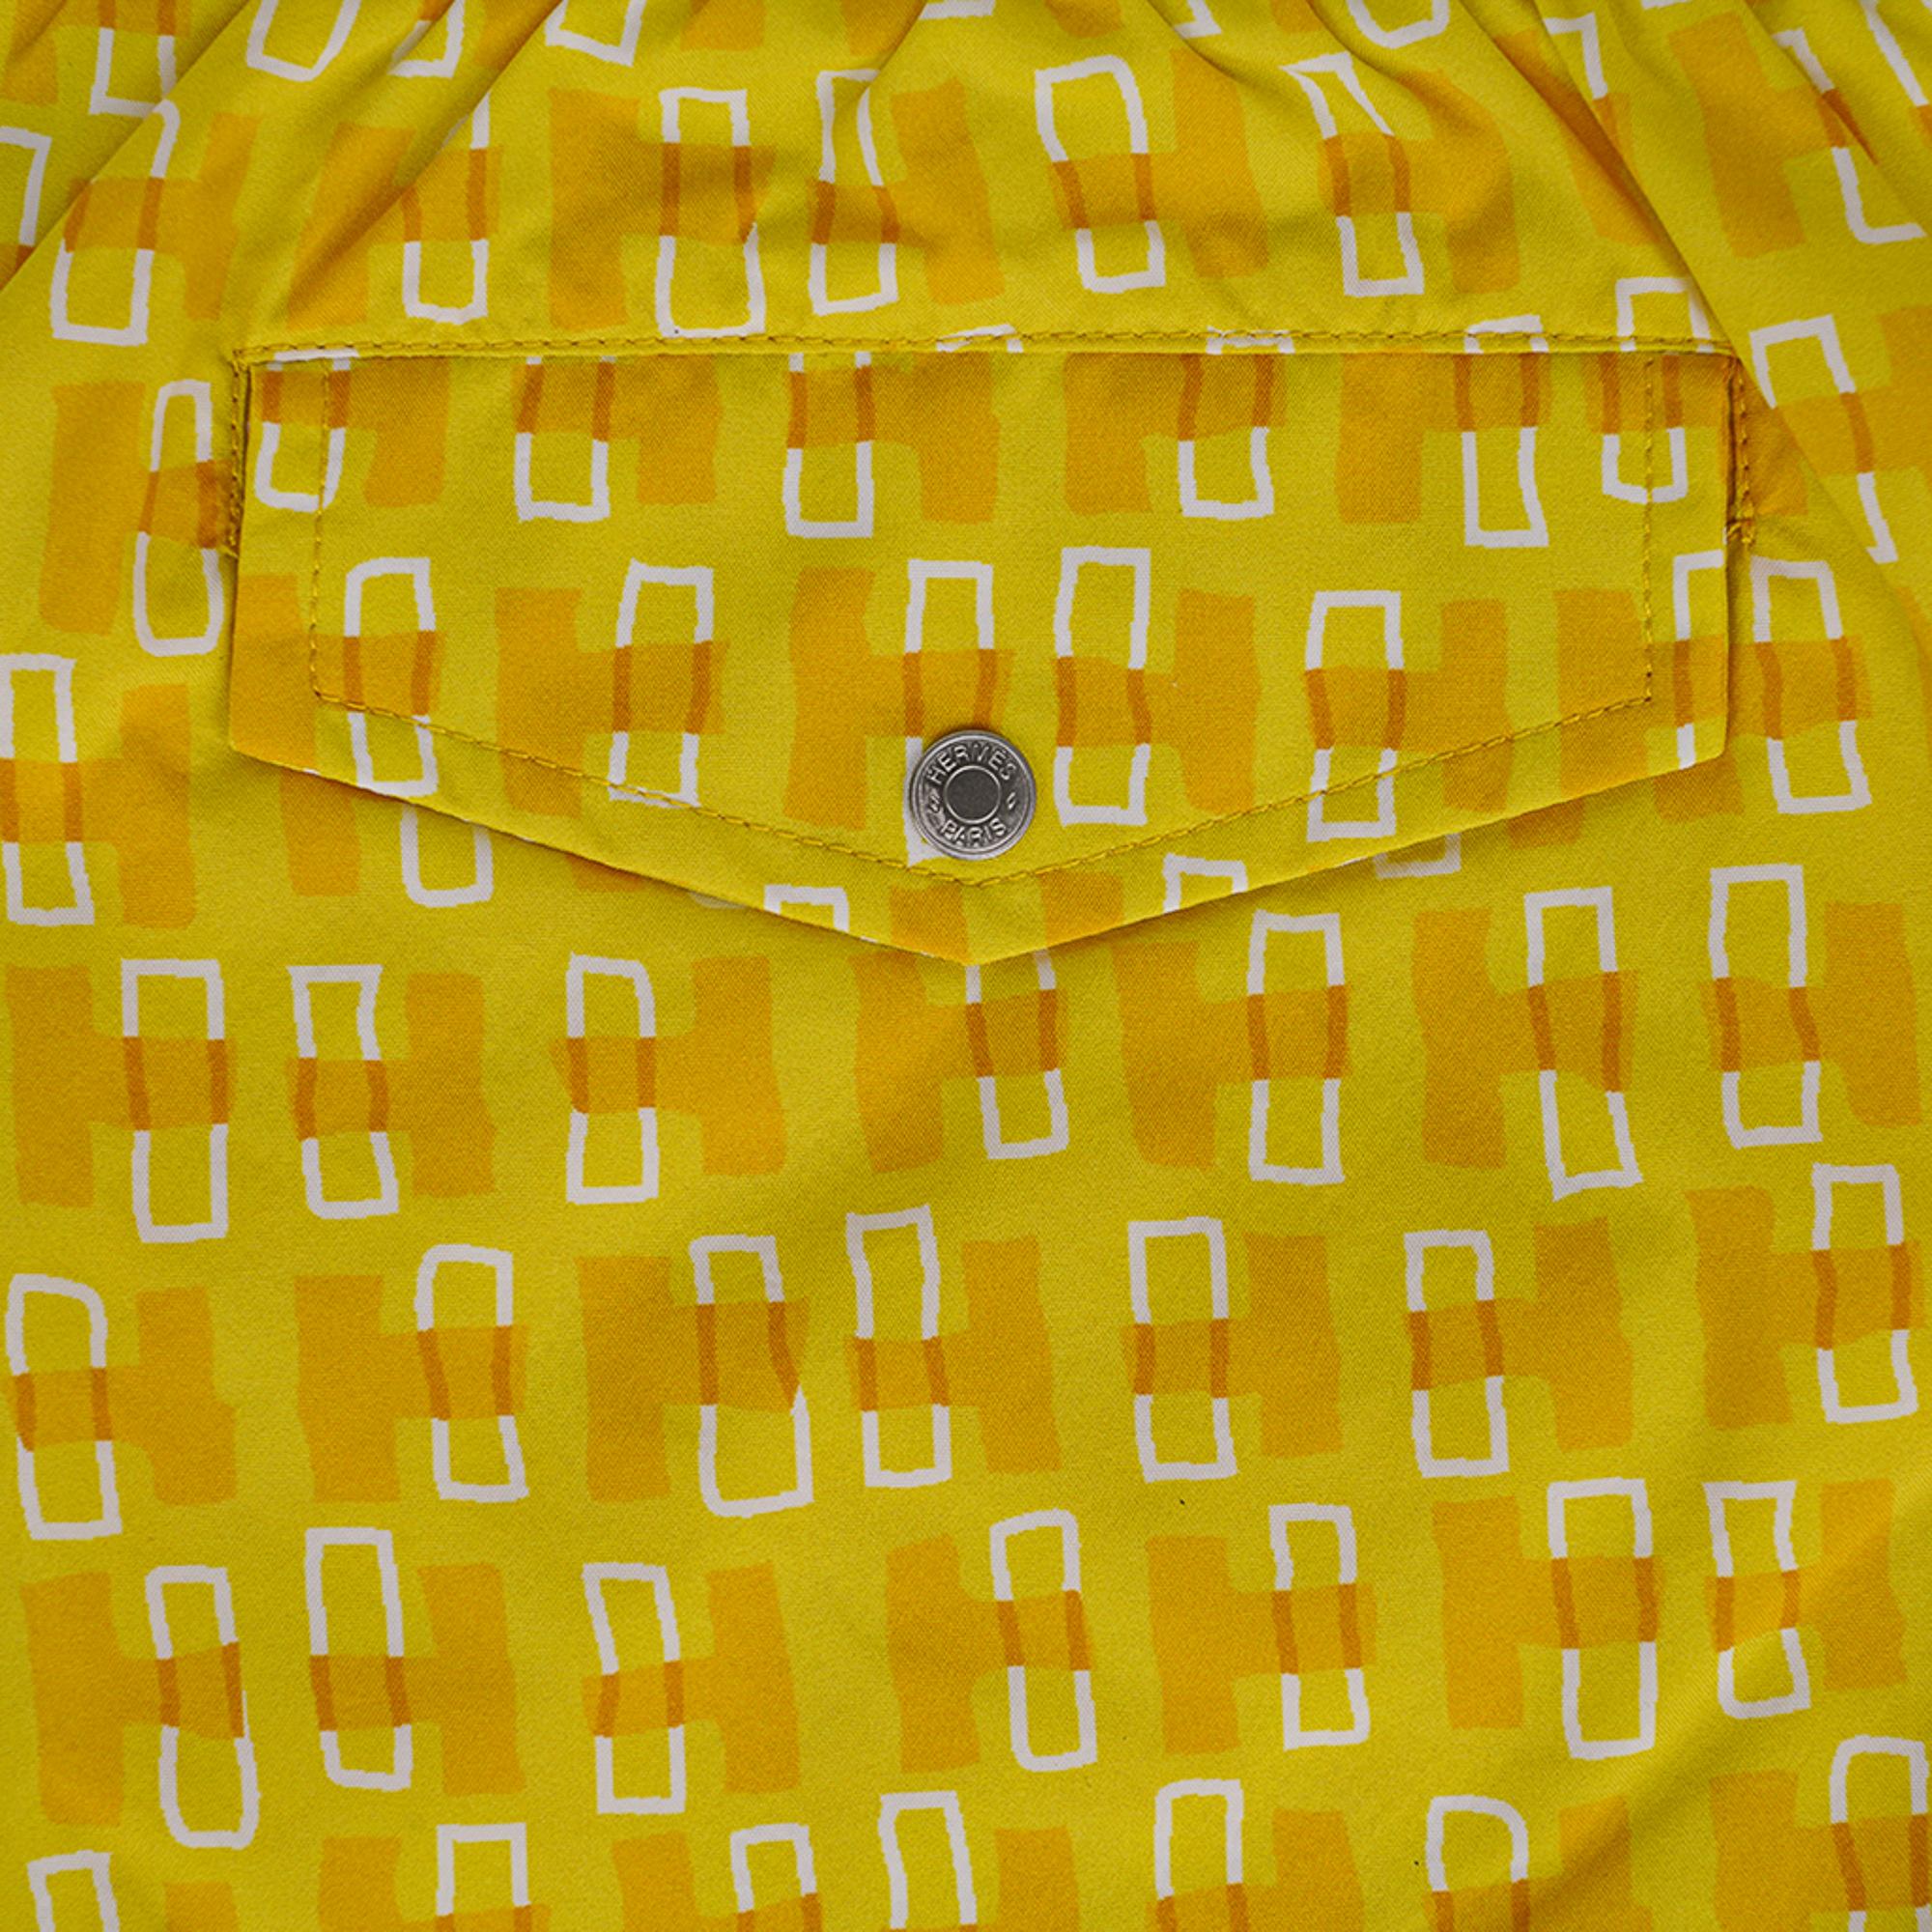 Hermes limited edition Men's Swim Trunks featured in Touches de H print.
Shades of yellow with a touch of white.
Elastic waist and silver metal tipped white drawstring.
2 front pockets and 1 rear pocket with Clou de Selle snap.
Lined in